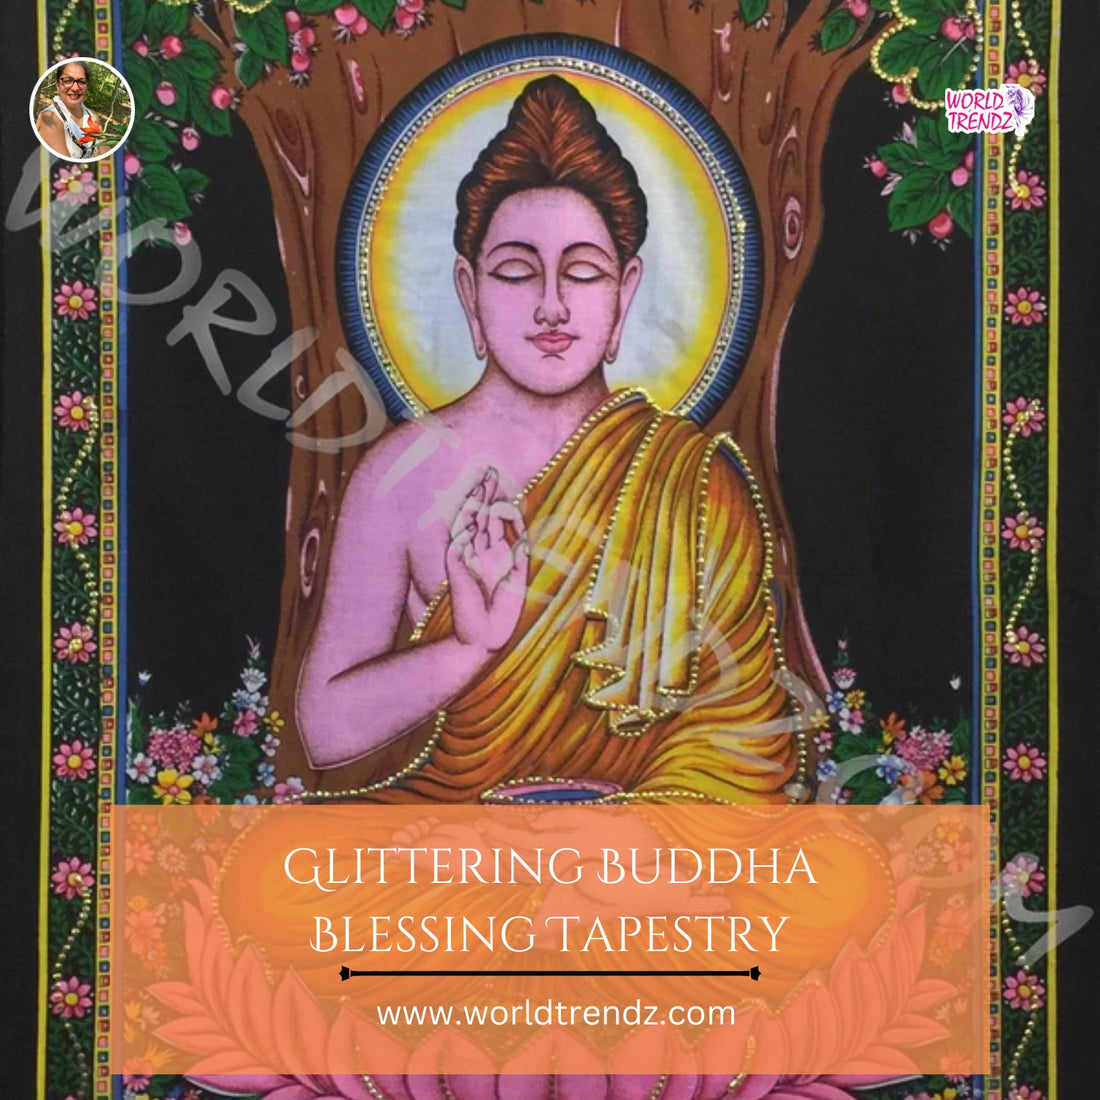 Bring Serenity to Your Home with the Buddha Blessing Deity Tapestry